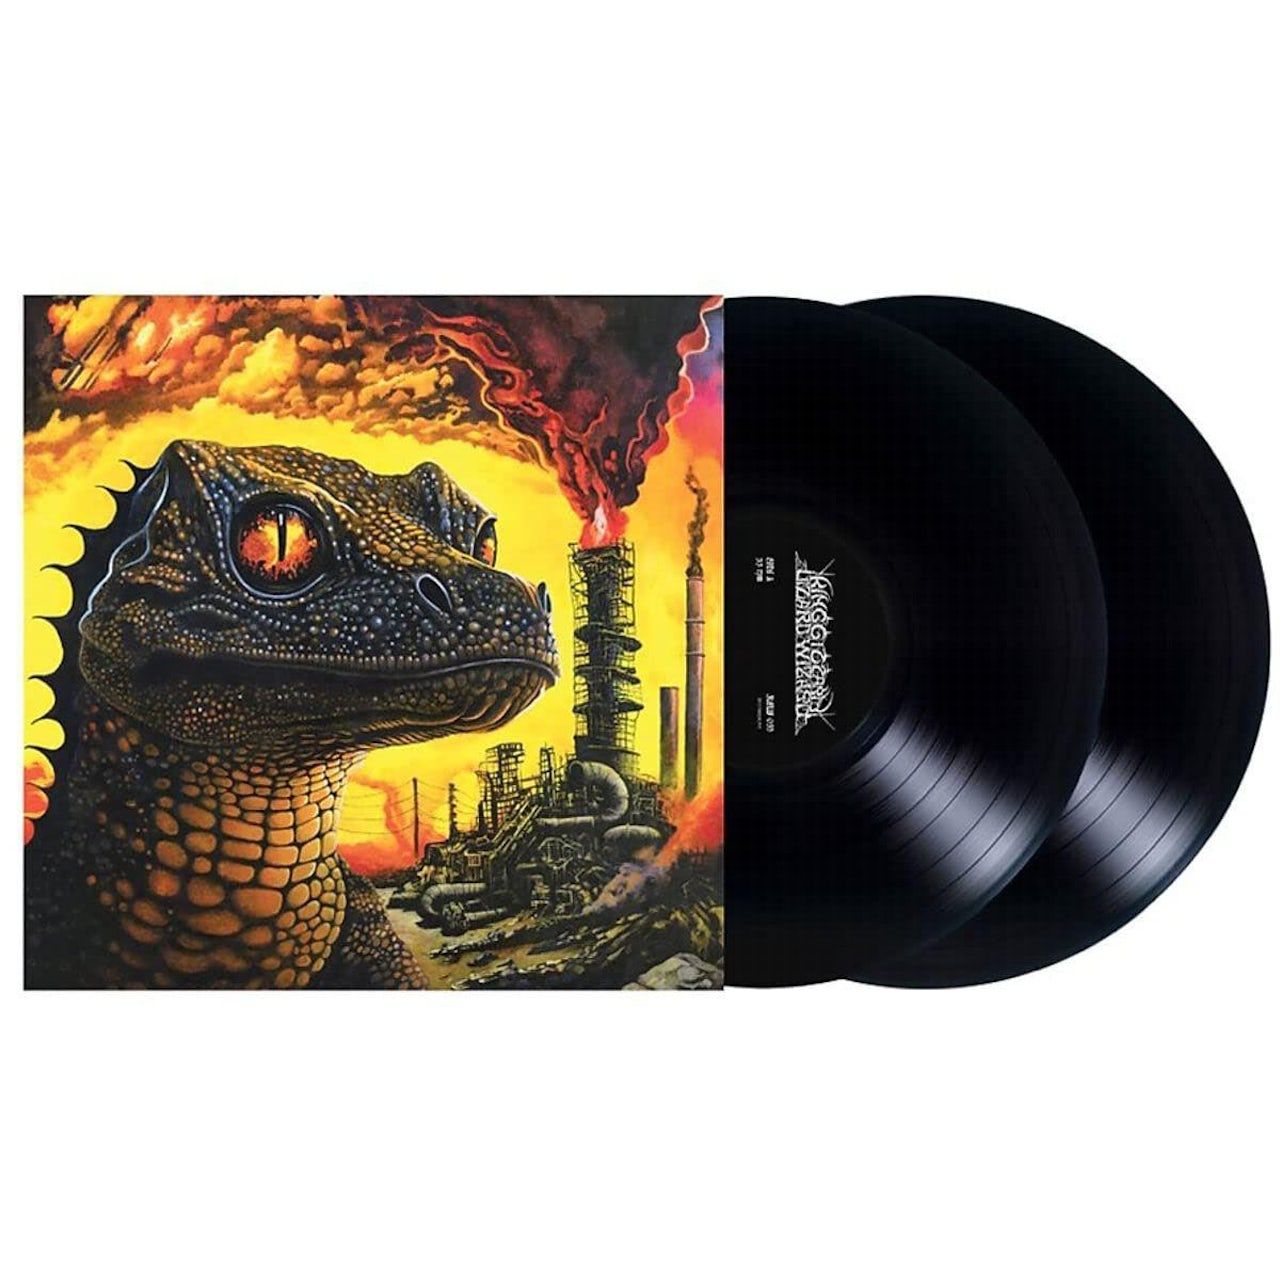 0842812189524, Виниловая пластинка King Gizzard & The Lizard Wizard, Petrodragonic Apocalypse; Or, Dawn Of Eternal Night: An Annihilation Of Planet Earth And The Beginning Of Merciless Damnation (coloured) king gizzard and the lizard wizard виниловая пластинка king gizzard and the lizard wizard petrodragonic apocalypse or dawn of eternal night an annihilation of planet earth and the beginni